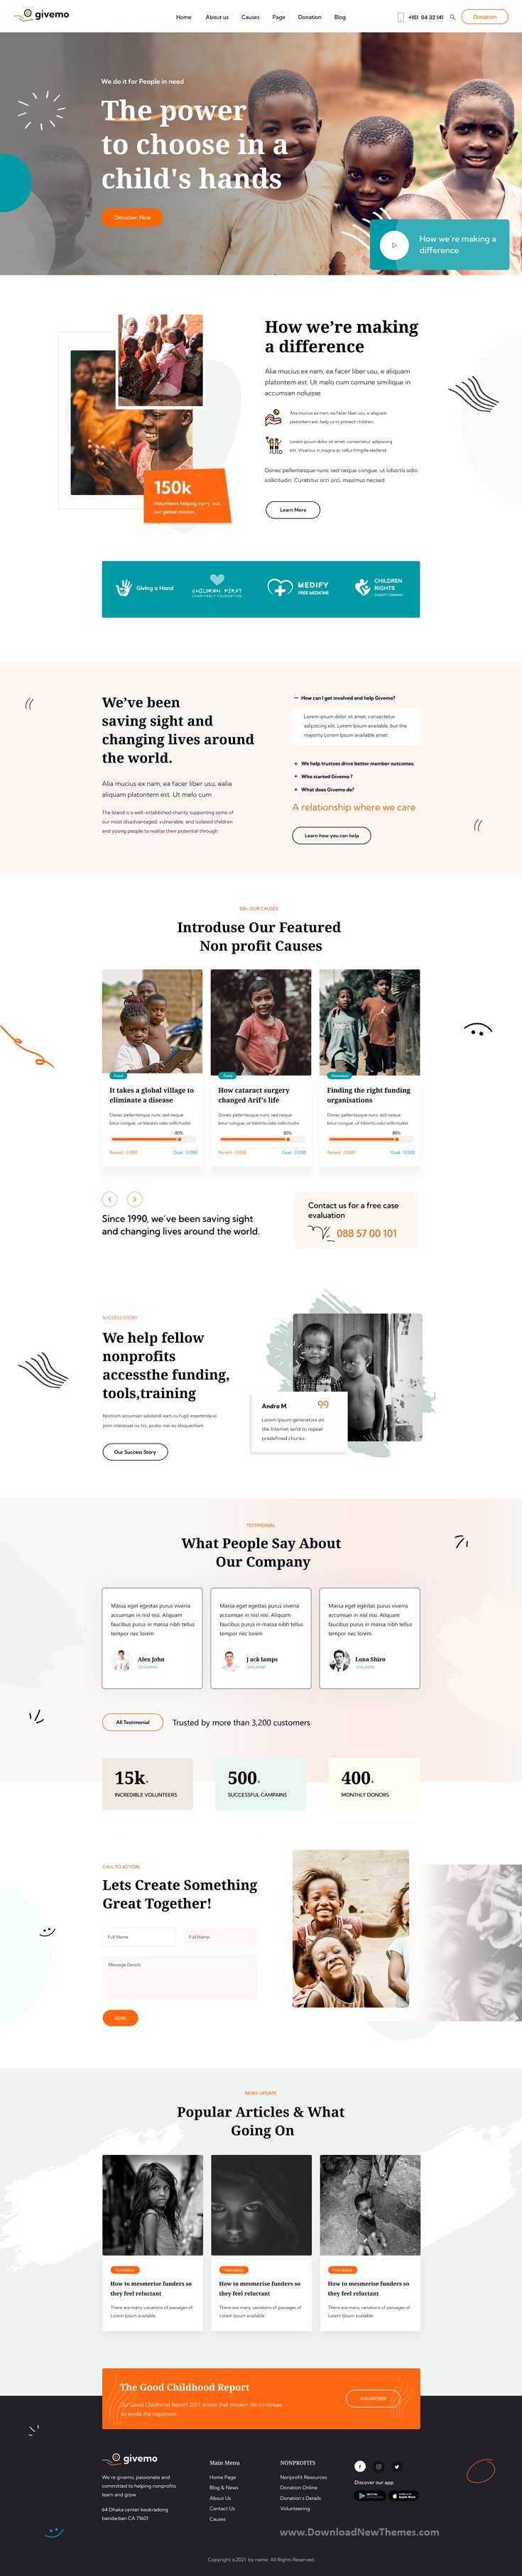 Givemo - Charity & Nonprofit Figma Template Review